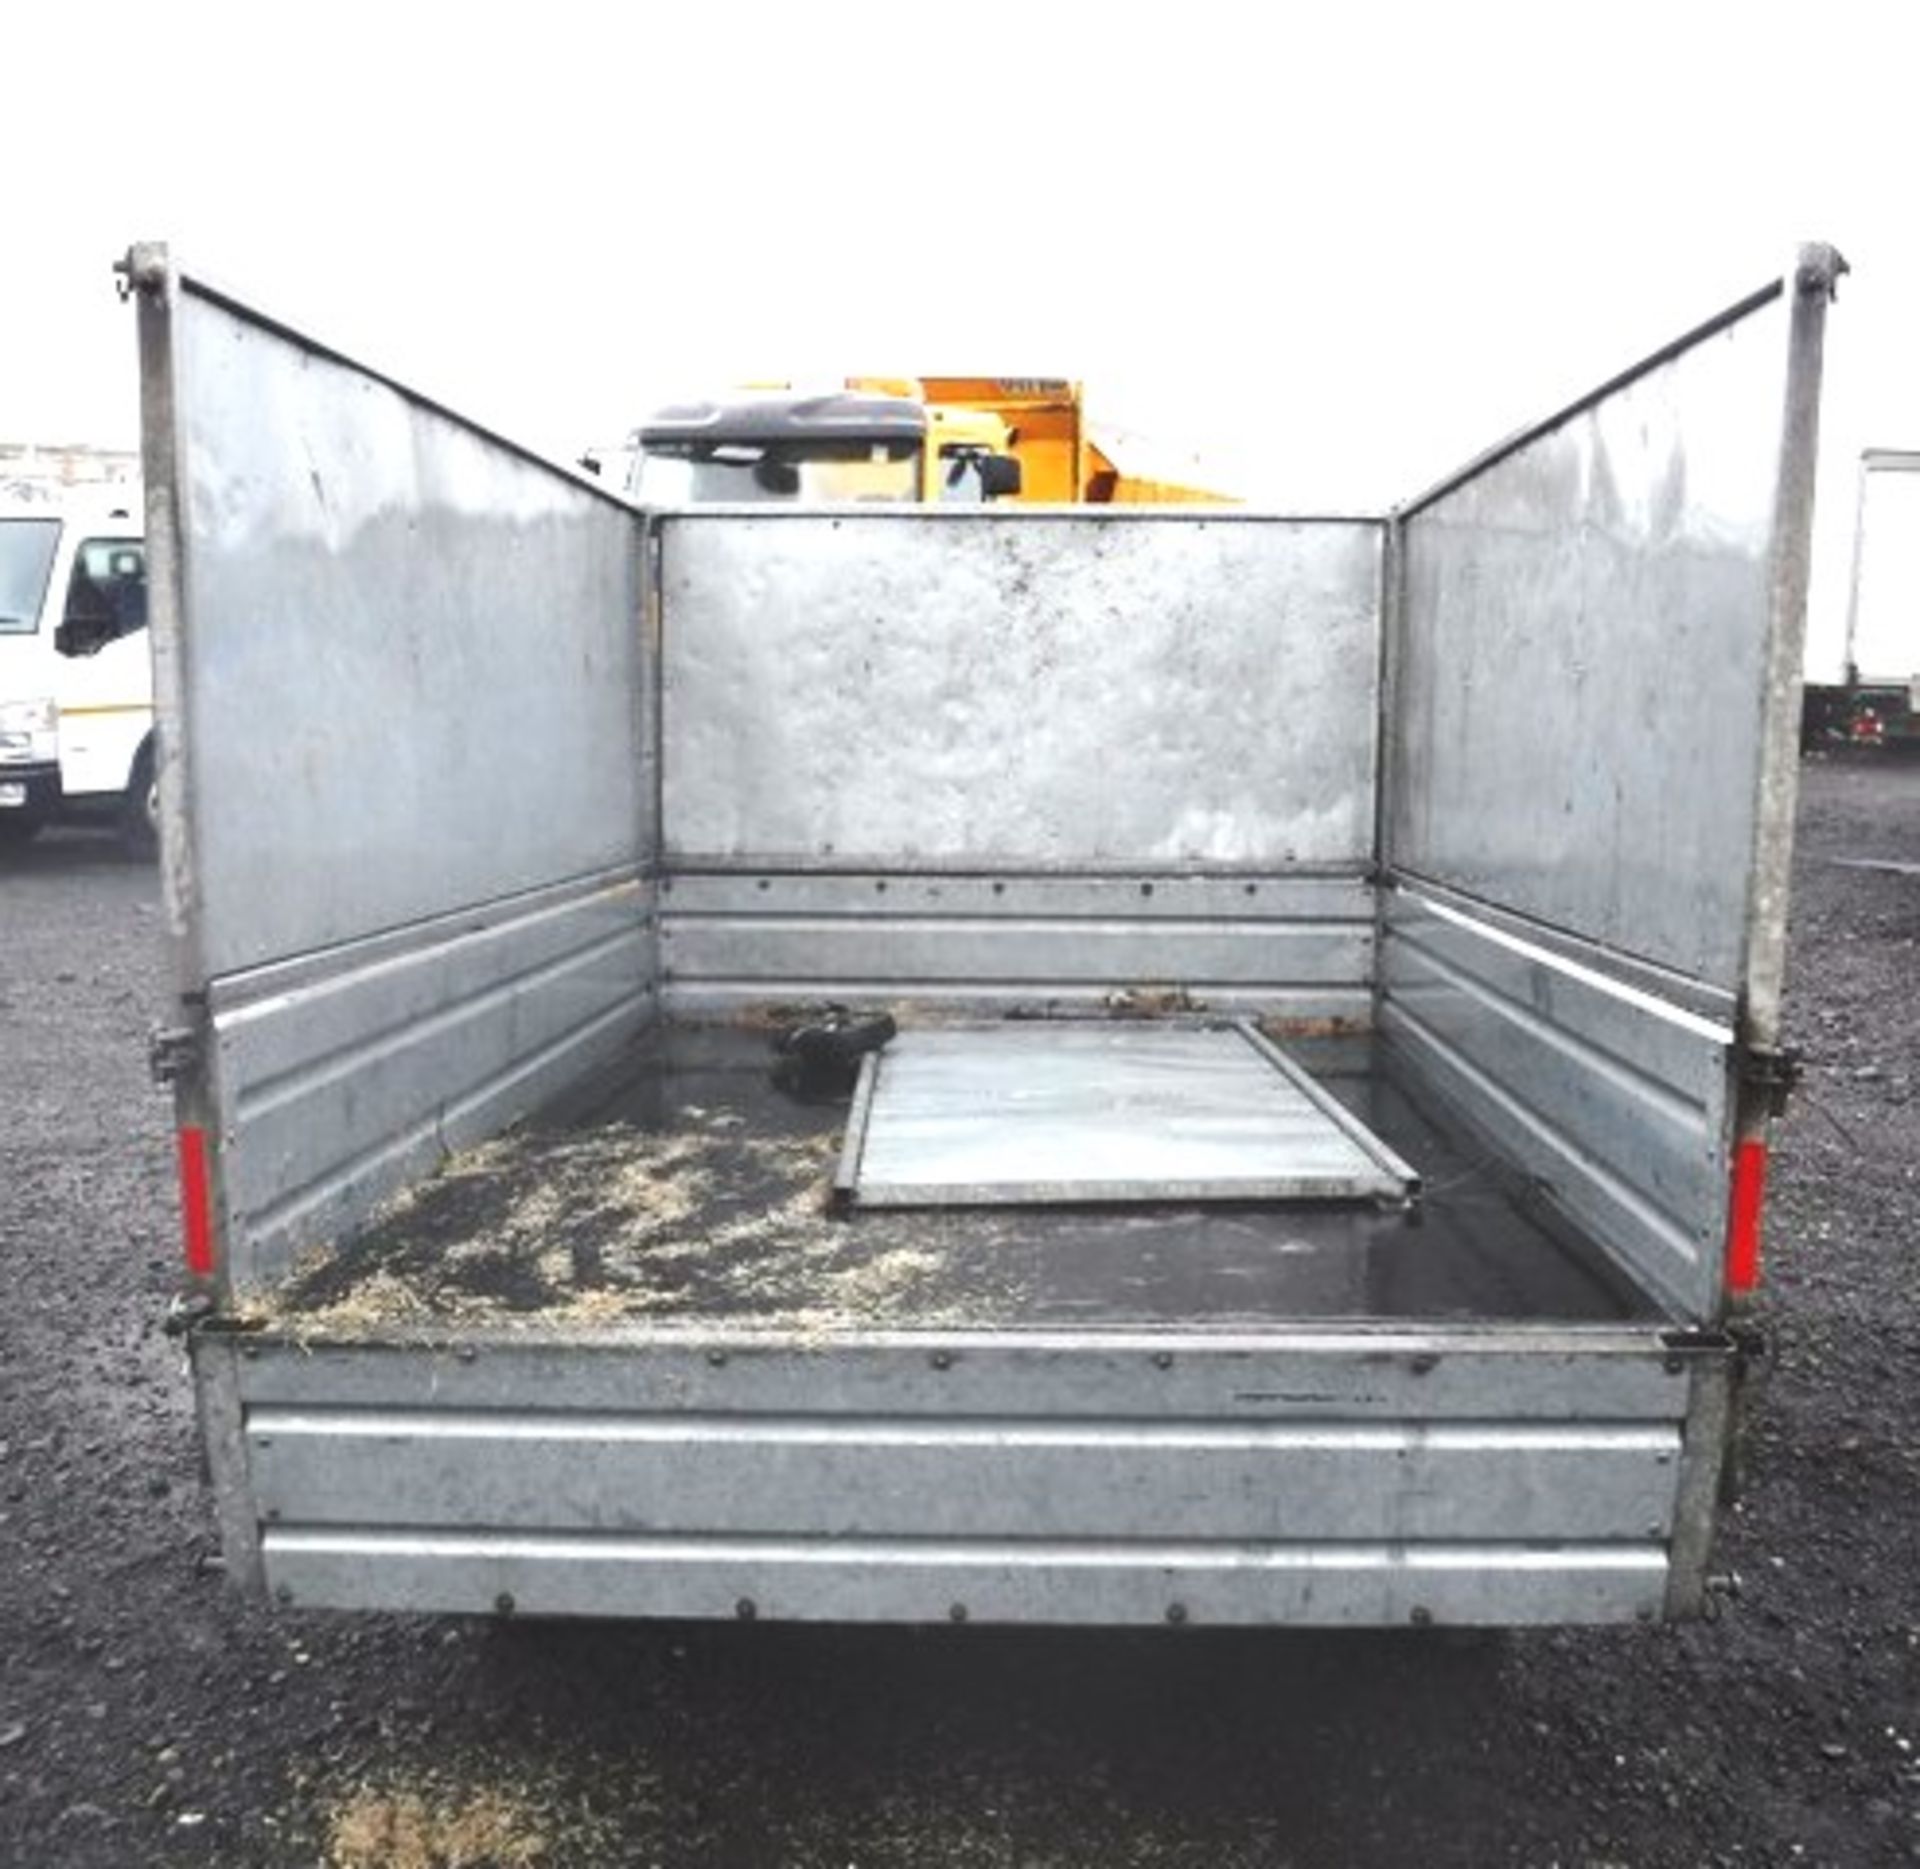 INDESPENSION twin axle tipping trailer with control. 8ft x 5.5ft. Asset - 758-7034 - Image 10 of 13